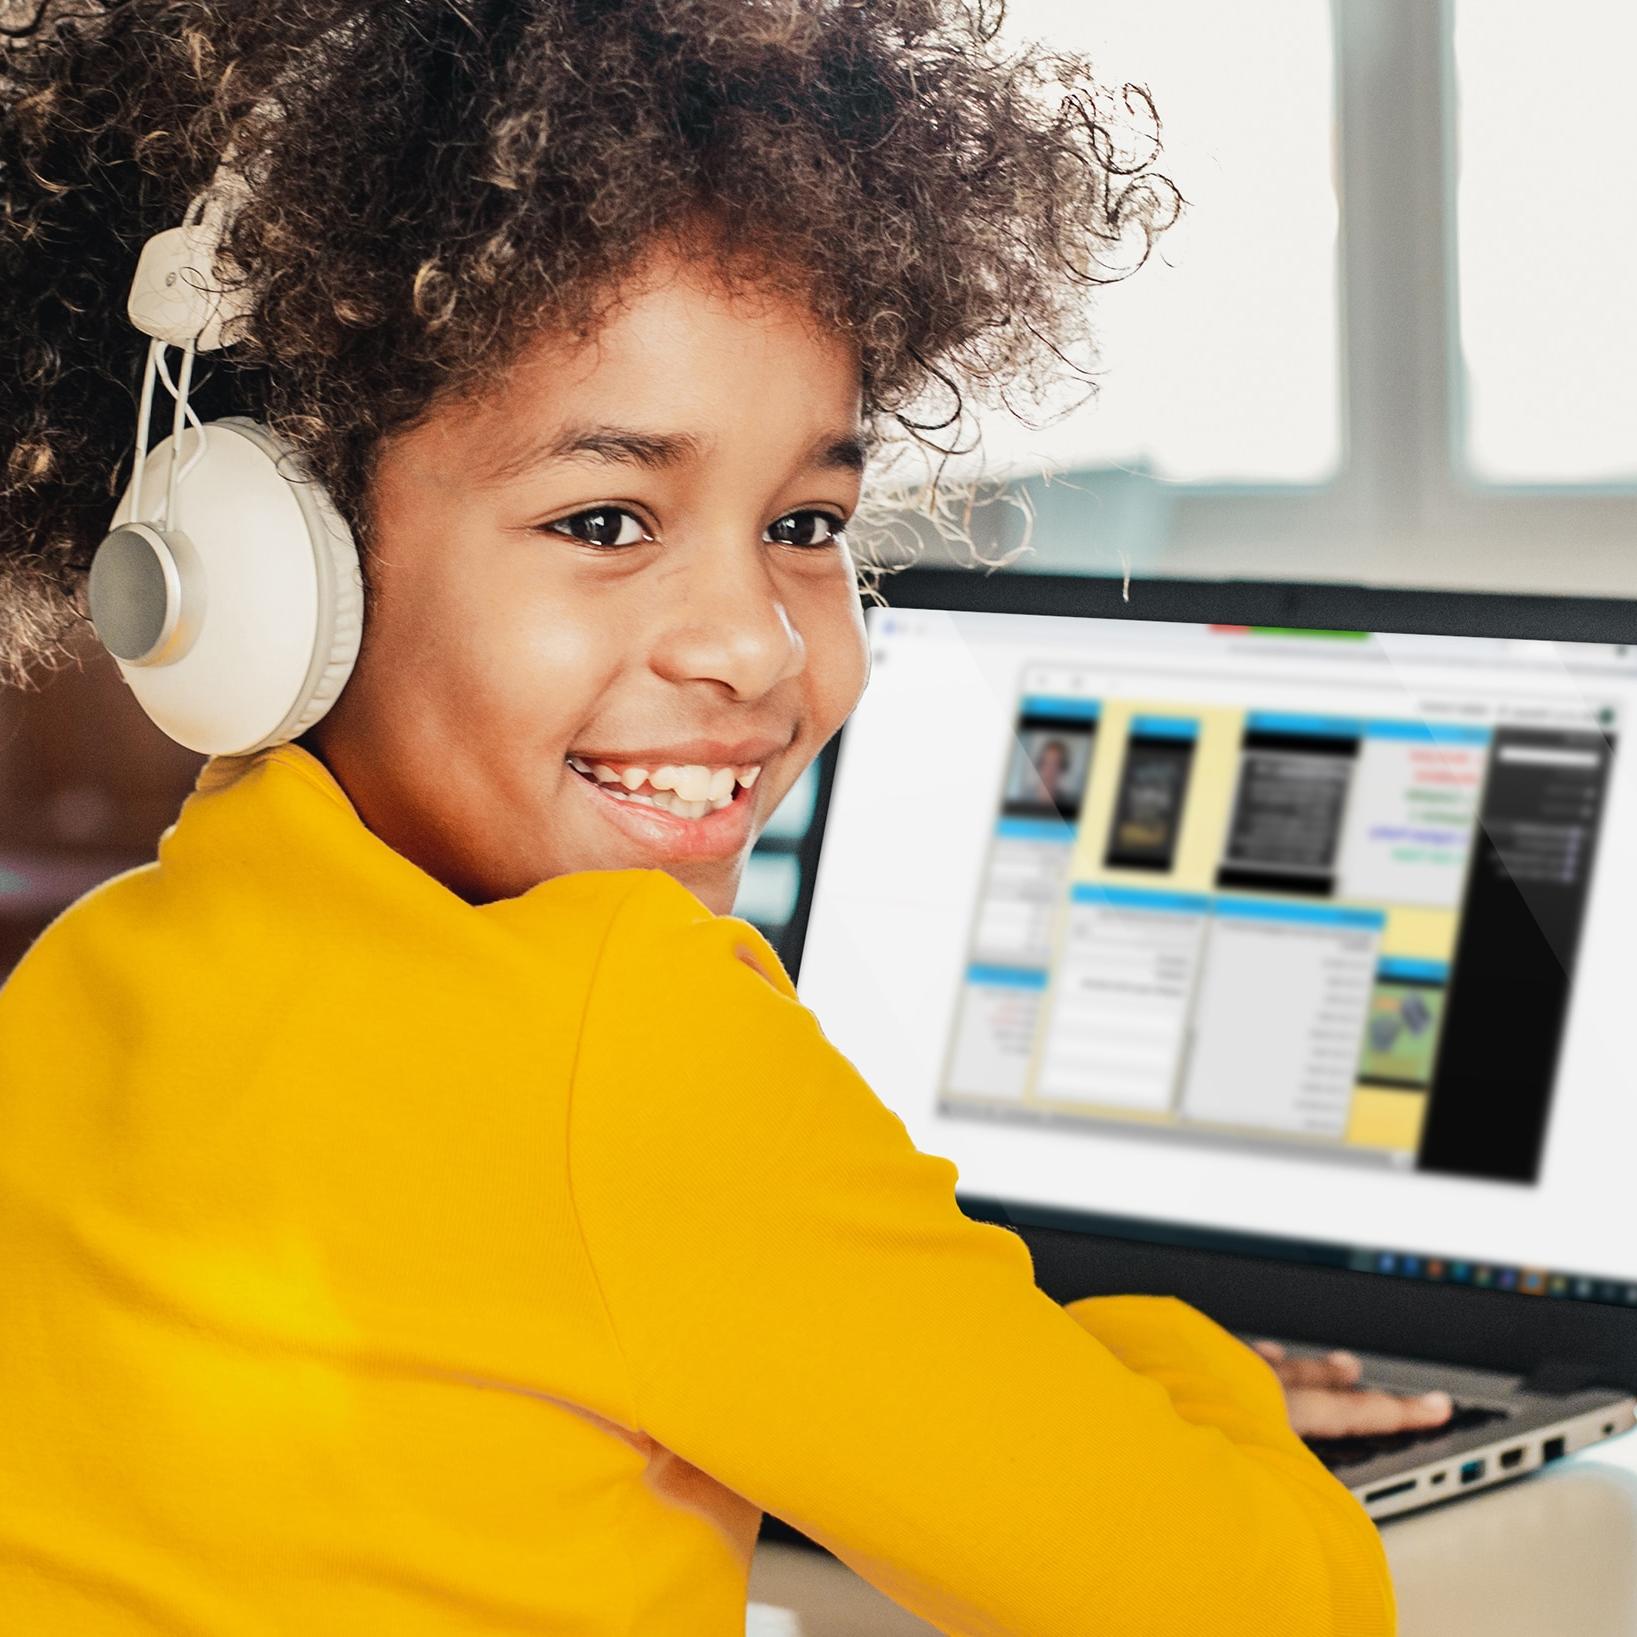 A young girl is smiling while listening to an online lesson